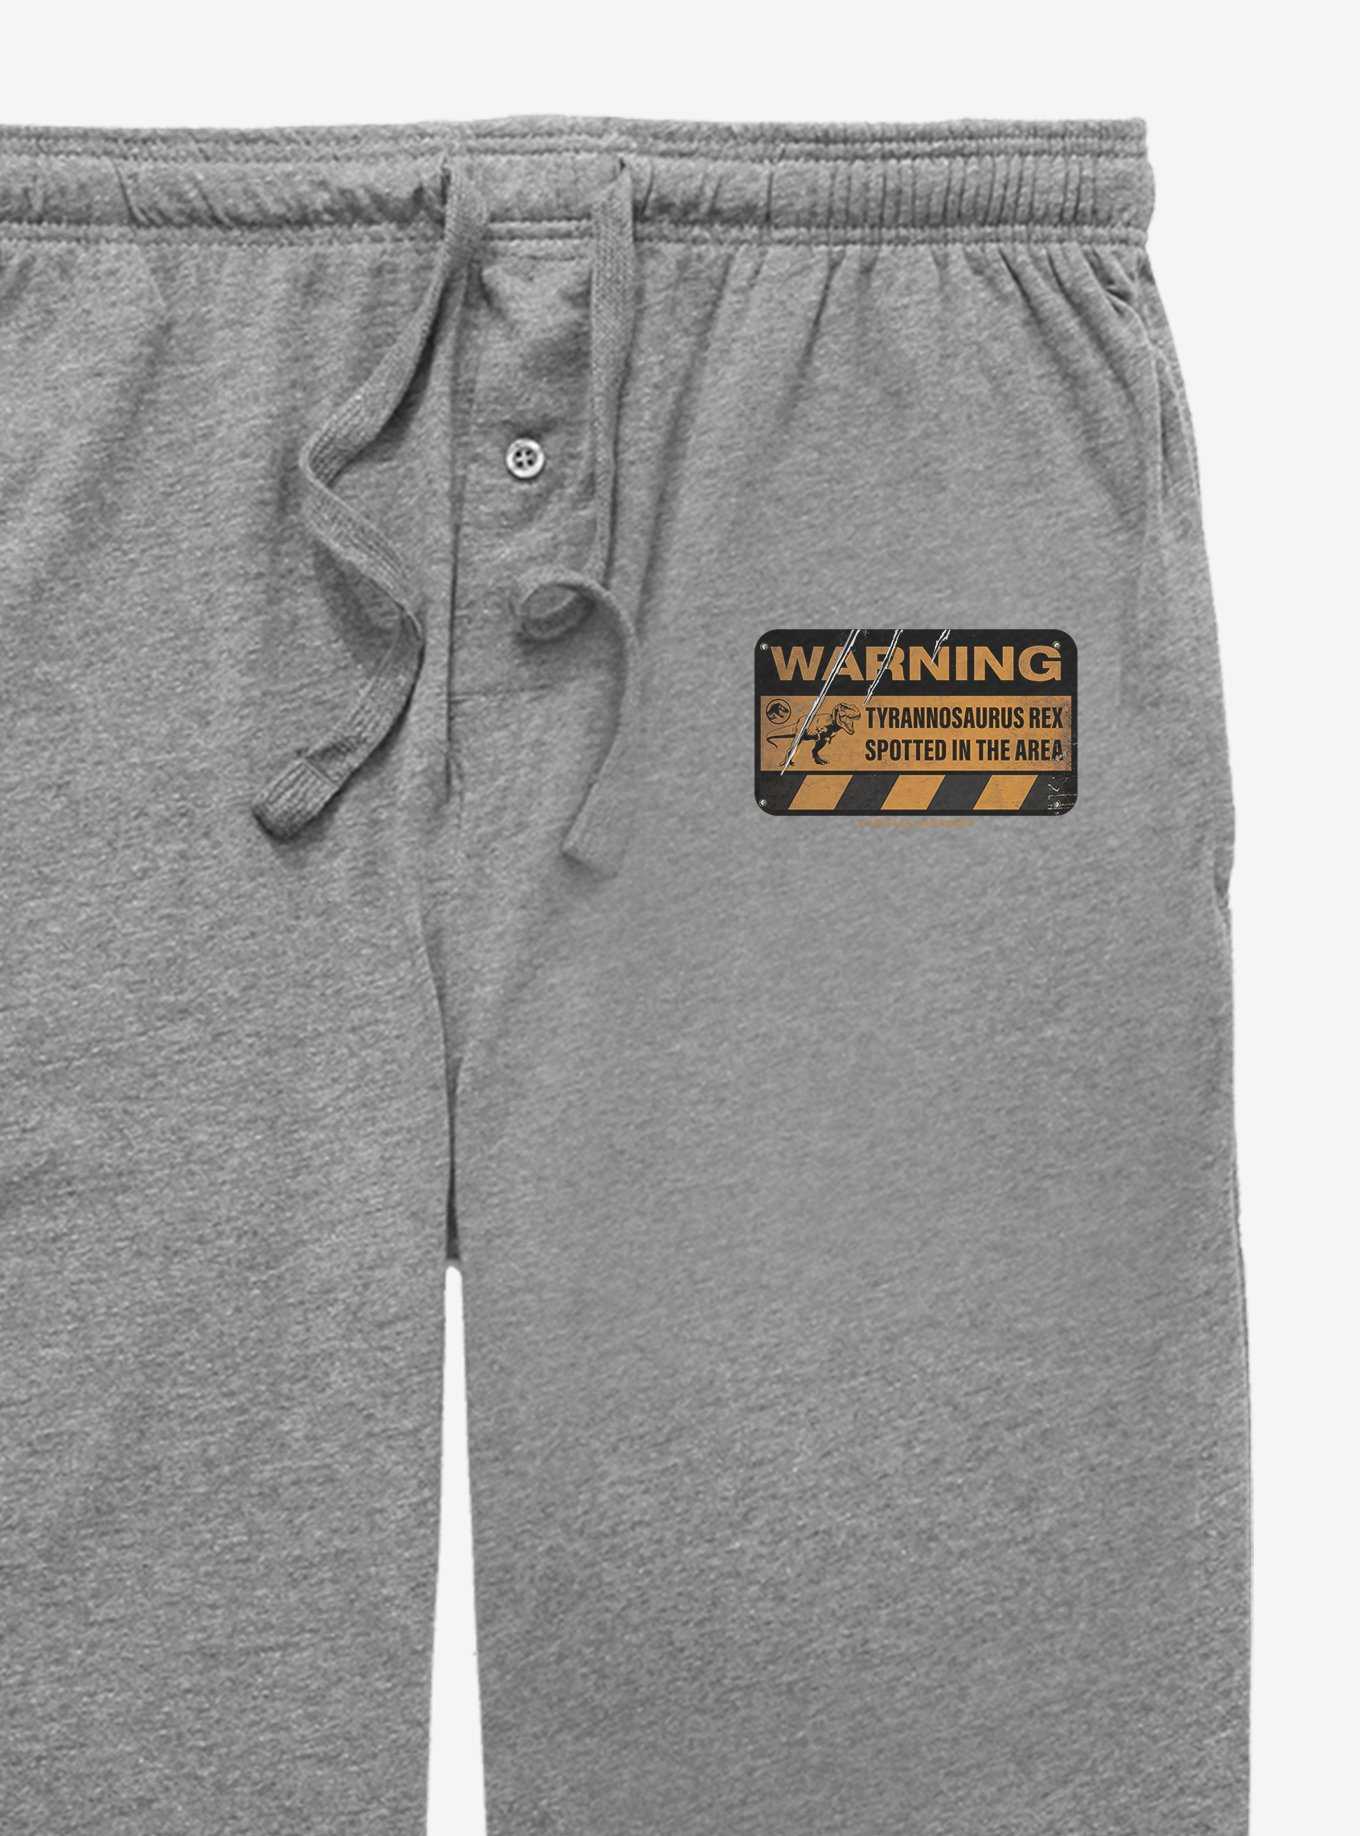 Jurassic World T-Rex Spotted Sign Pajama Pants, , hi-res